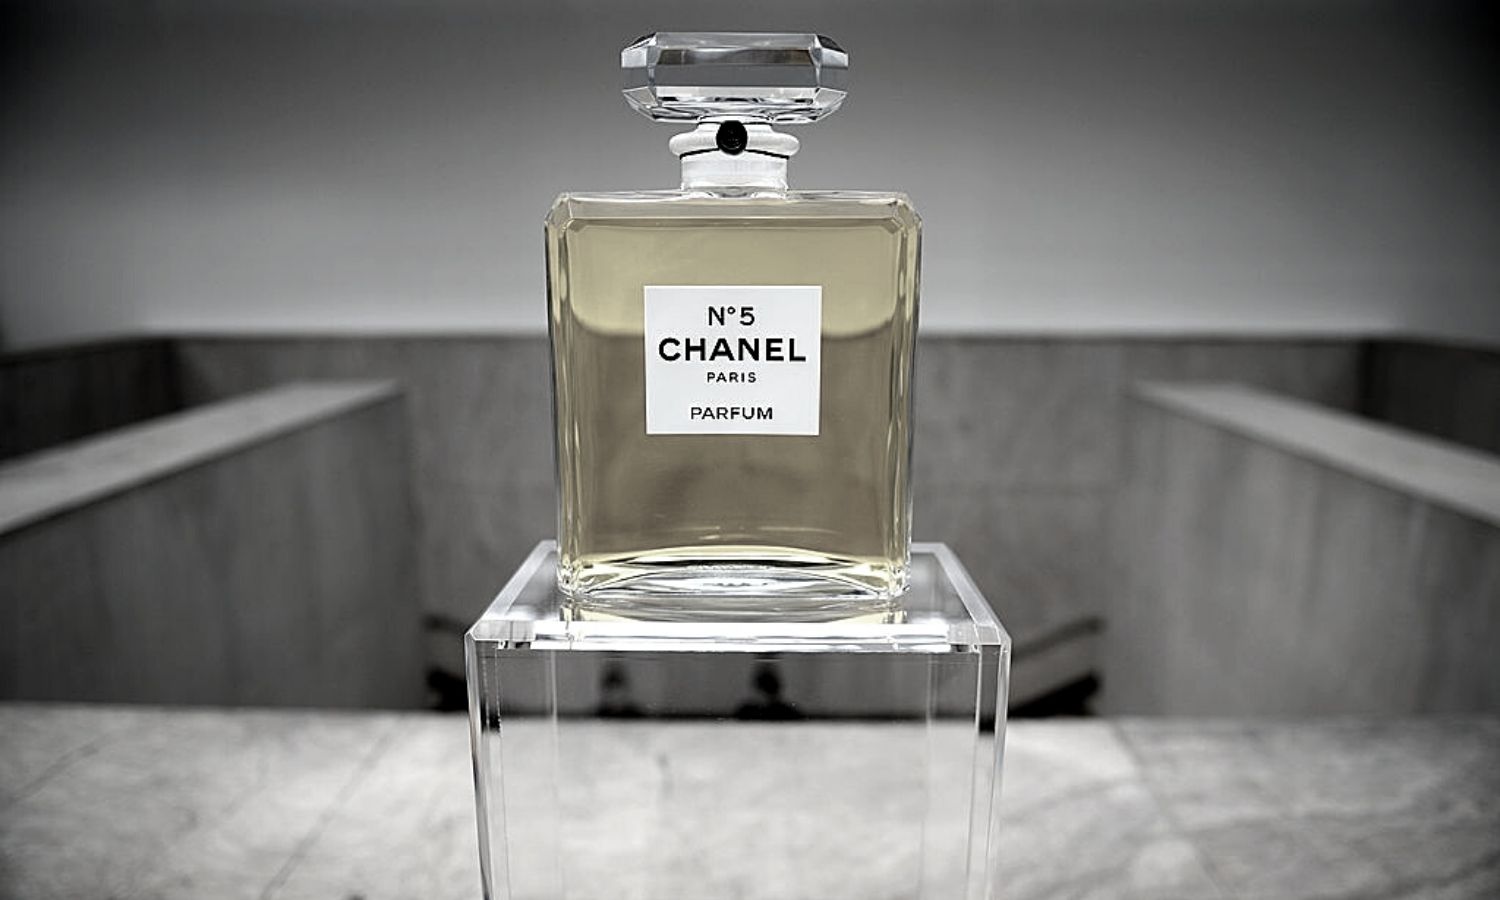 OTD in 1921: Perfume Chanel No.5 was released.